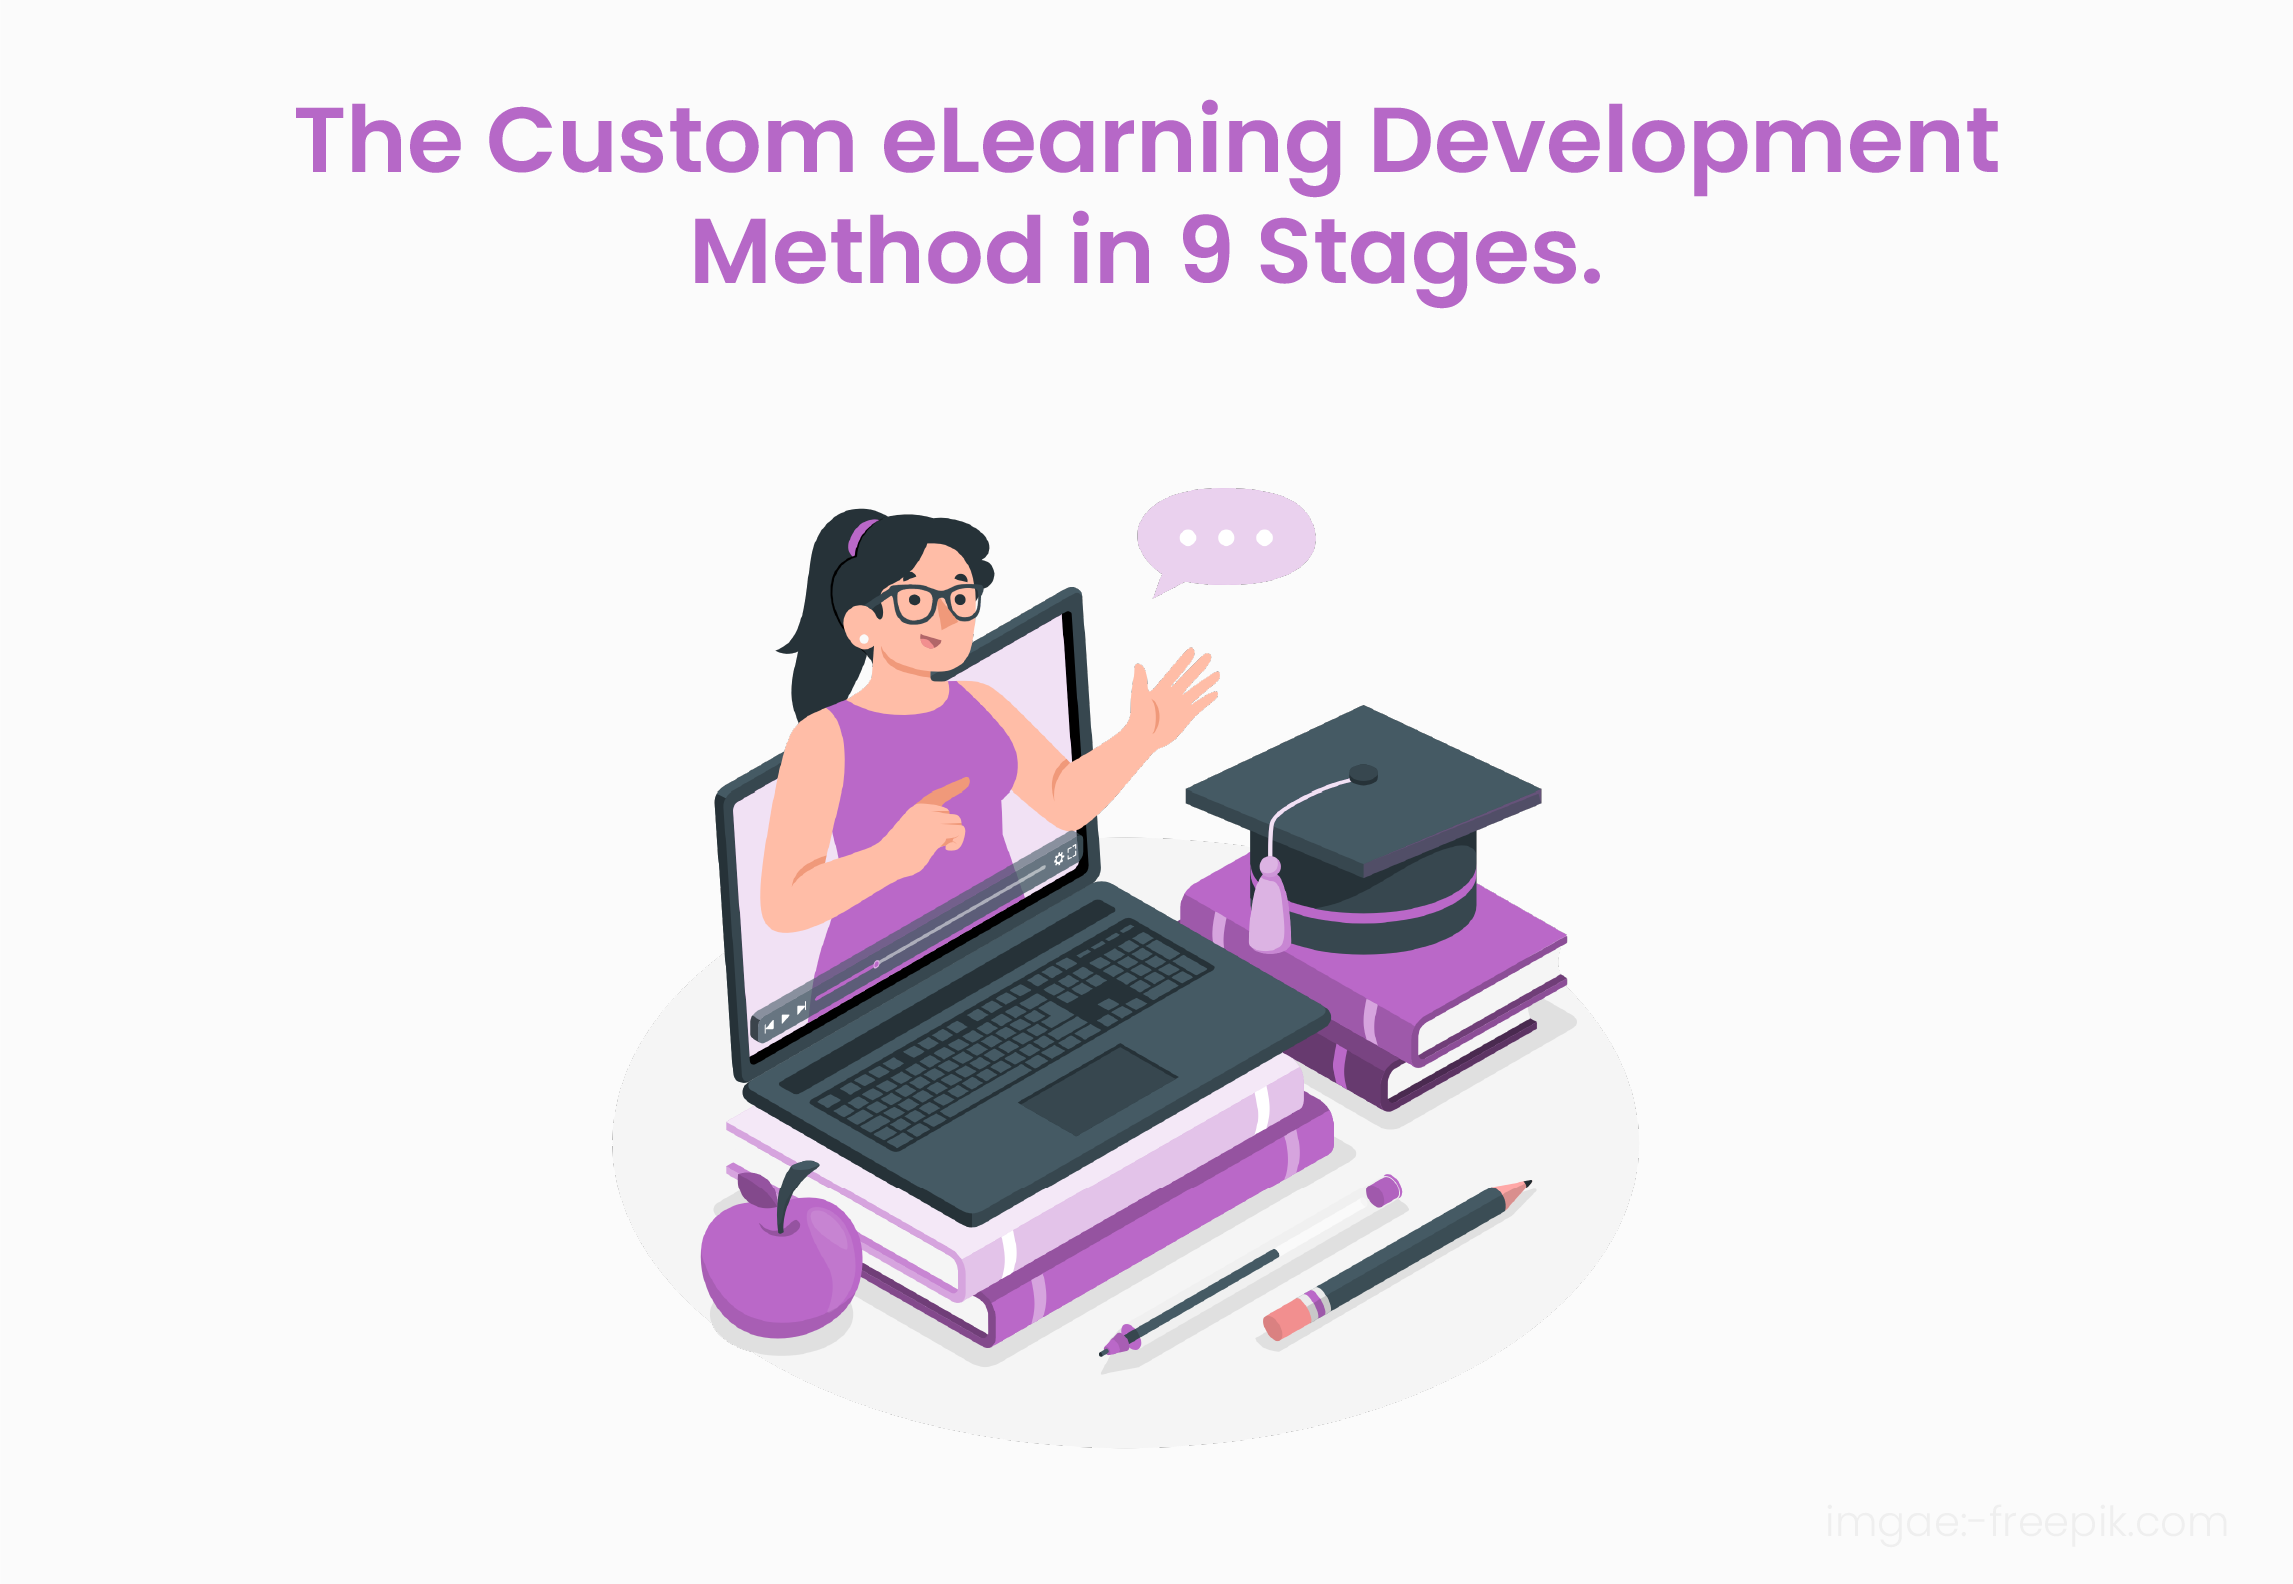 A Brief Overview of 9 Stages of Custom E-Learning Development Method